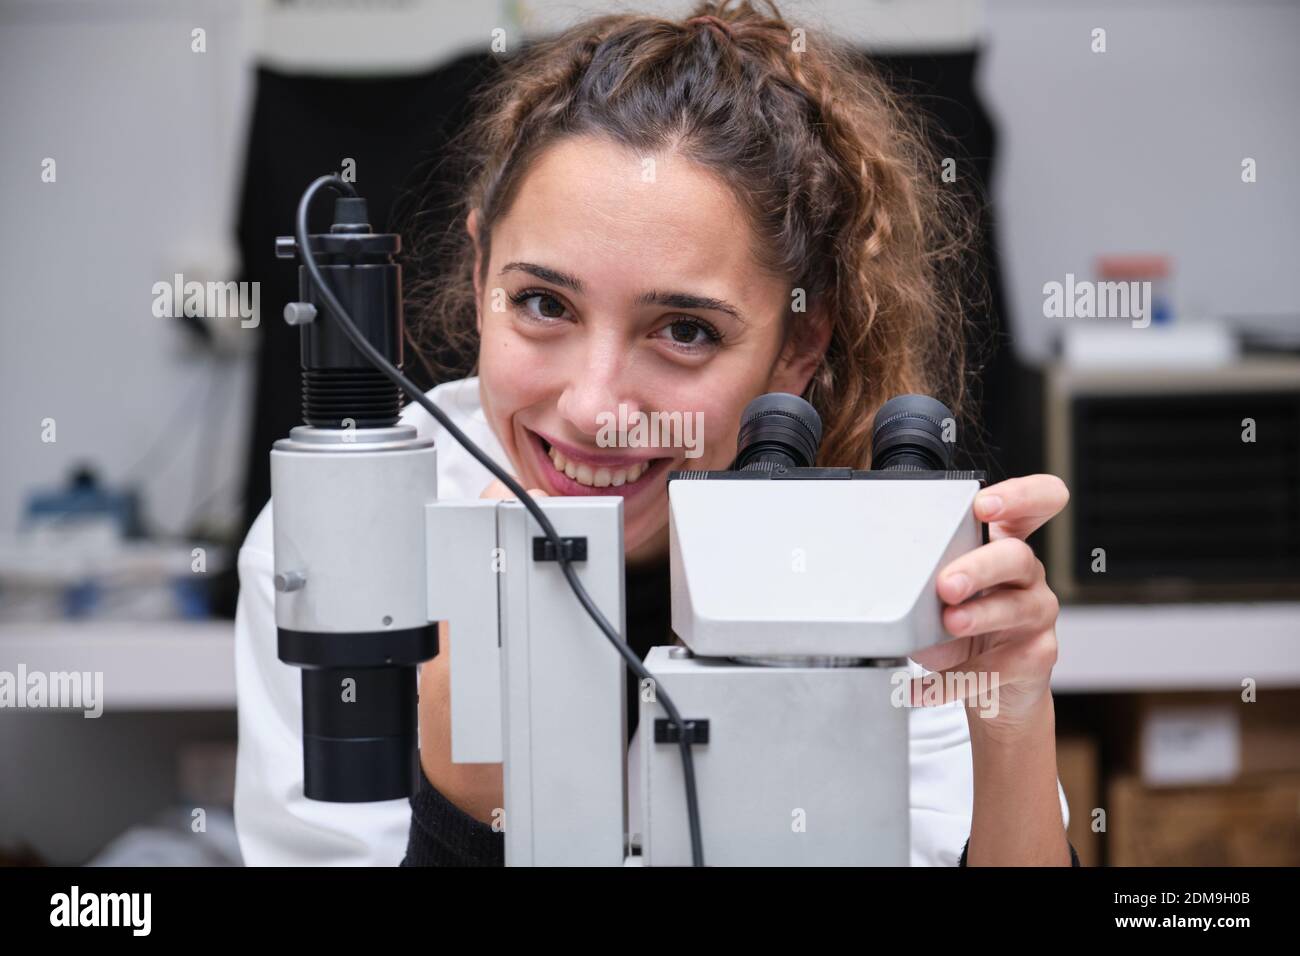 Young female scientist looking at camera and smiling next to a microscope in a laboratory. Laboratory research concept. Stock Photo